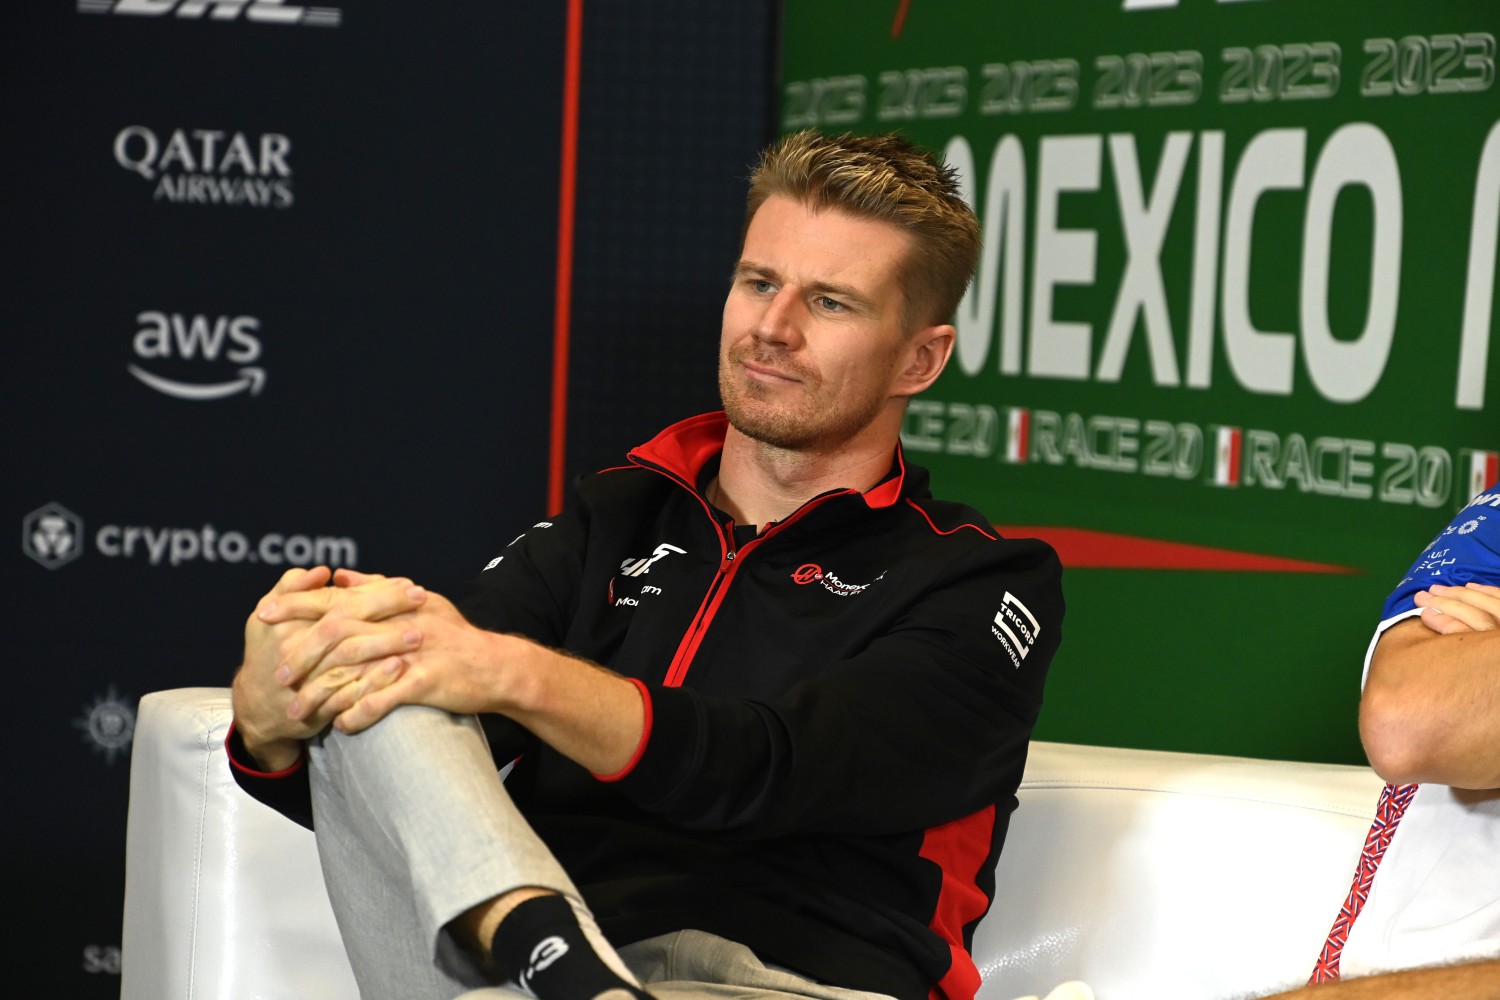 Nico Hulkenberg, Haas F1 Team, during the drivers press conference during the Mexico City GP at Autodromo Hermanos Rodriguez on Thursday October 26, 2023 in Mexico City, Mexico. (Photo by Mark Sutton / LAT Images)